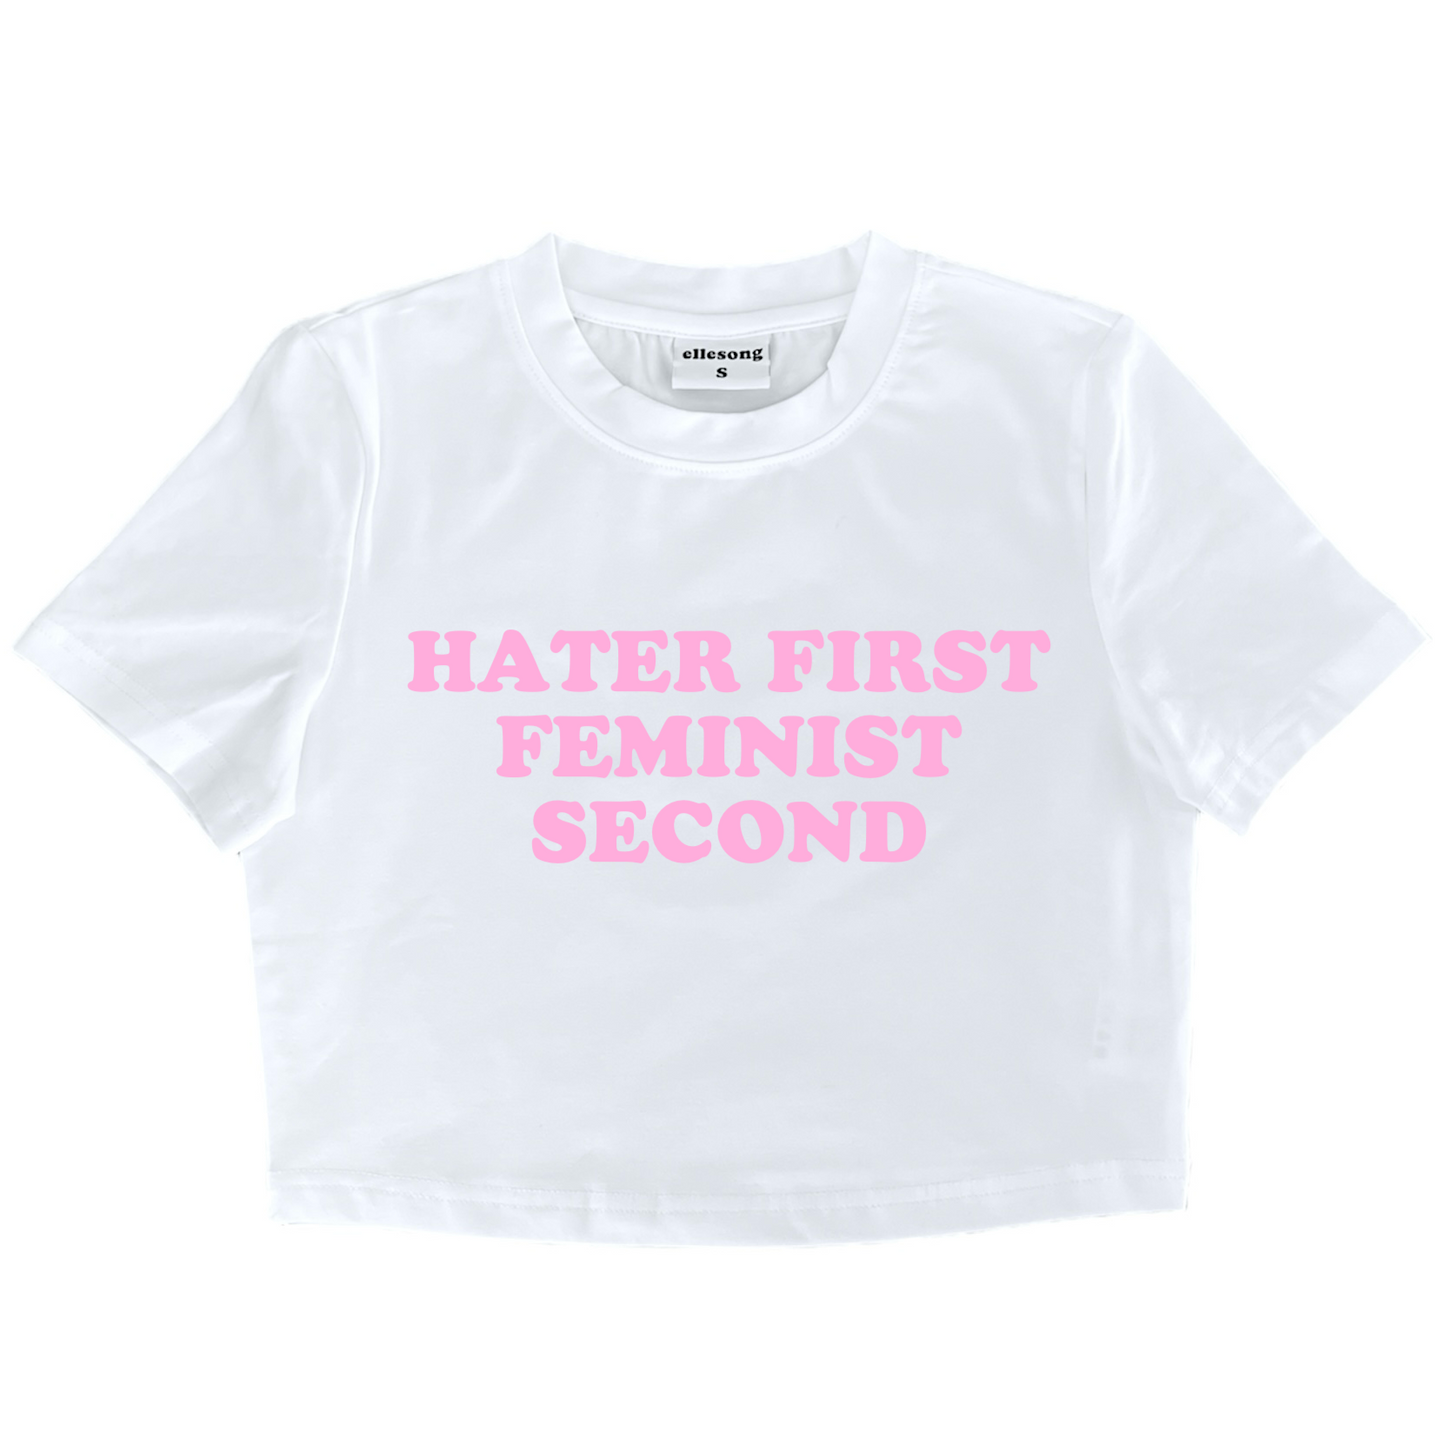 Hater First Feminist Second Baby Tee